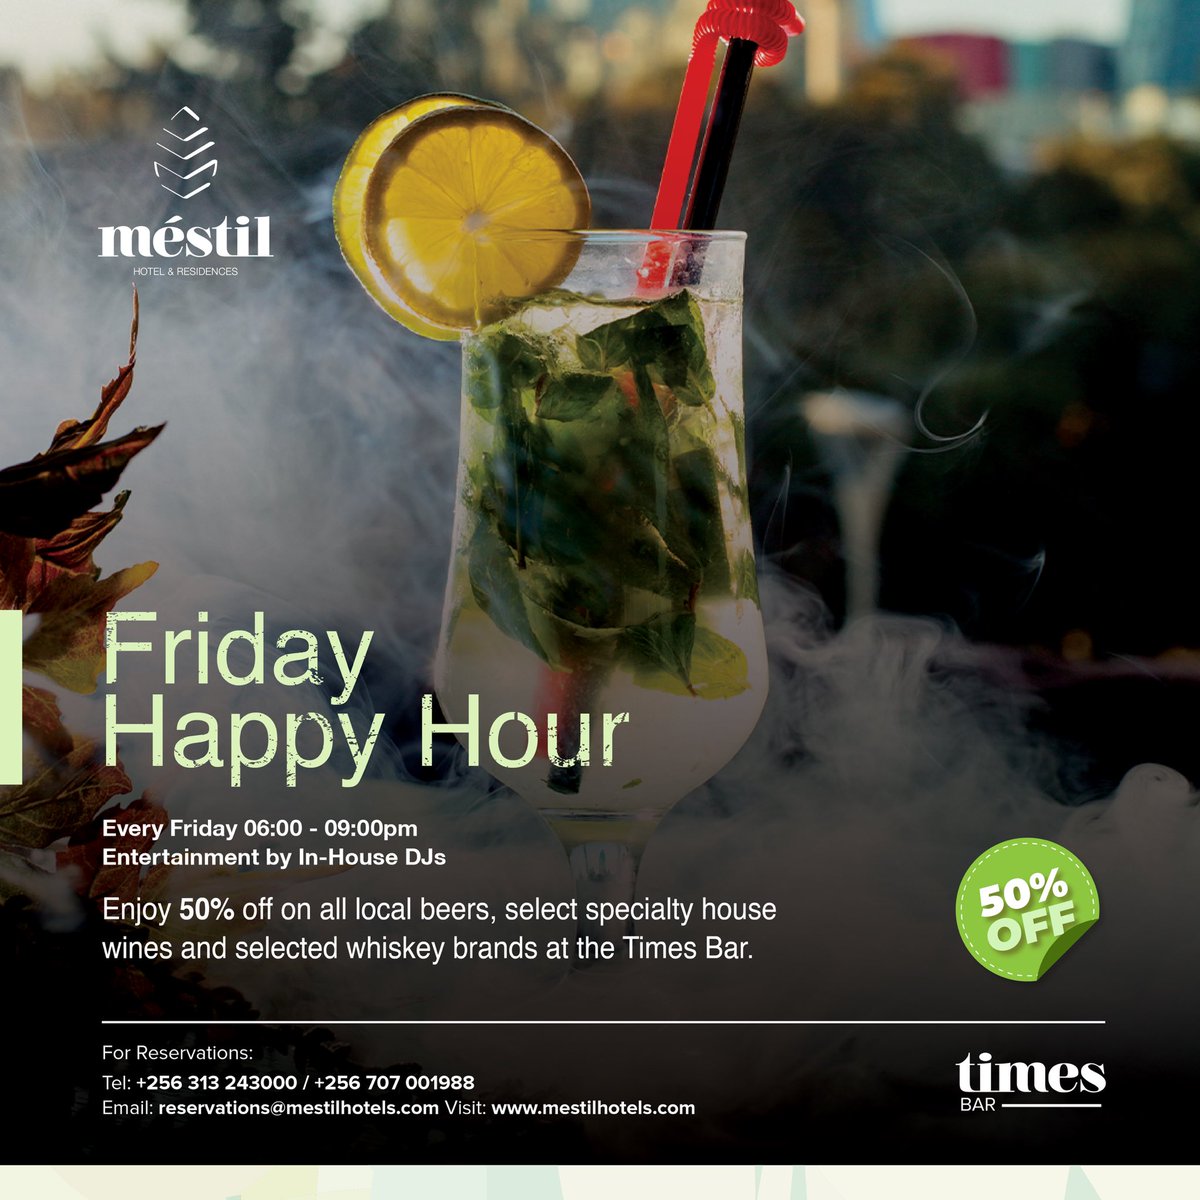 End your week on a high note!  Join us at the Times Bar for happy hour every Friday from 6pm to 9pm. Enjoy 50% off local beers, select wines and whiskeys, and live entertainment by In-house DJ.

Here’s to good times, great drinks, and amazing company! #TimesBar #HappyHour